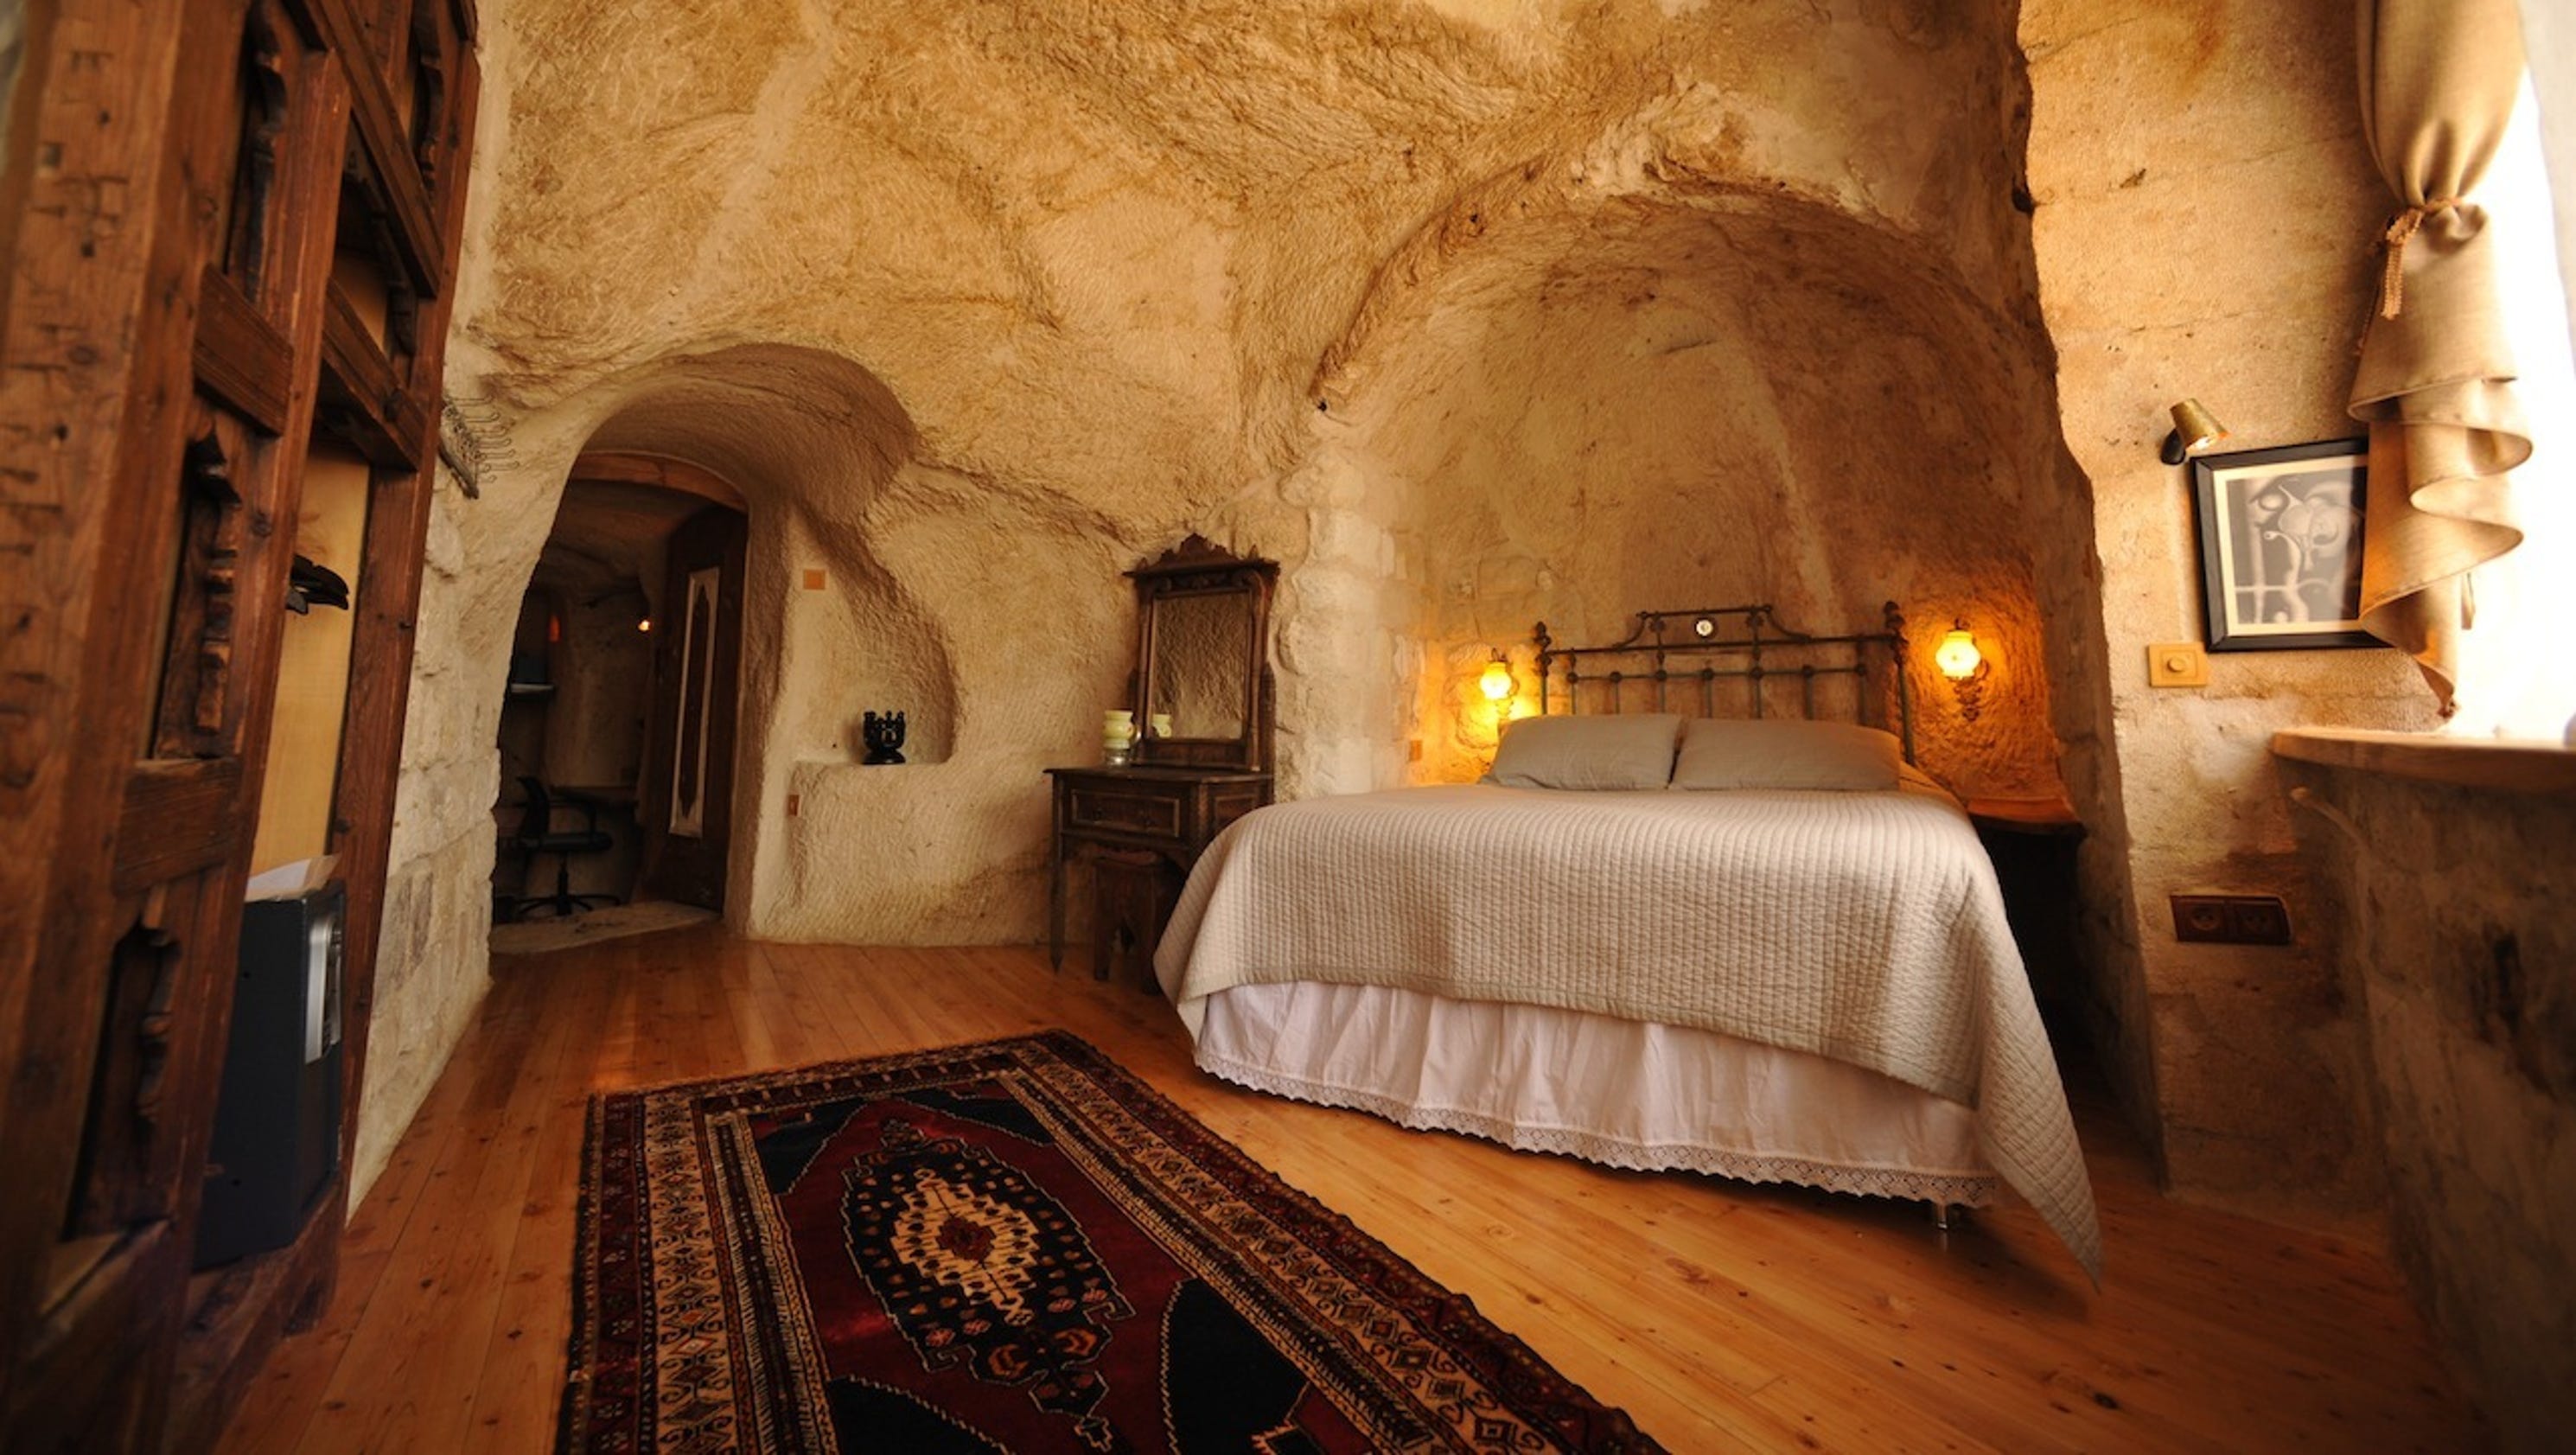 Unusual vacation rentals: Caves and cave-like dwellings